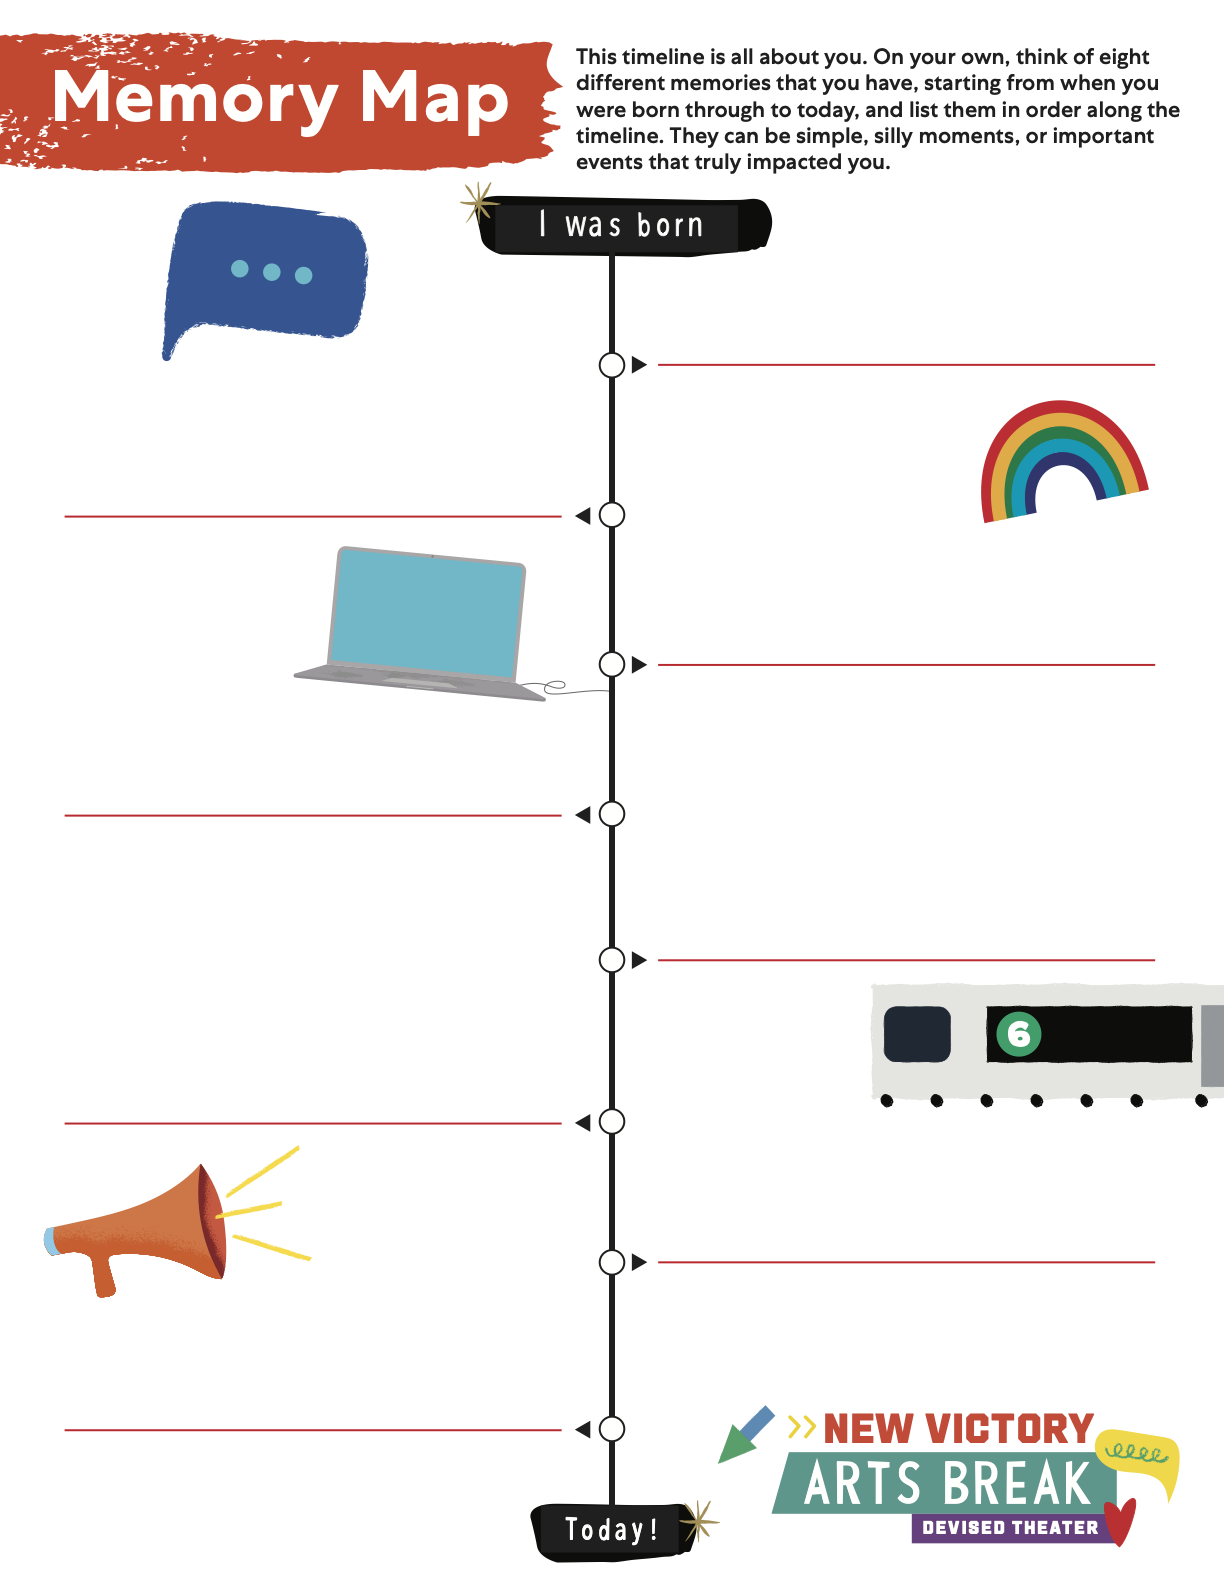 Memory Map timeline template